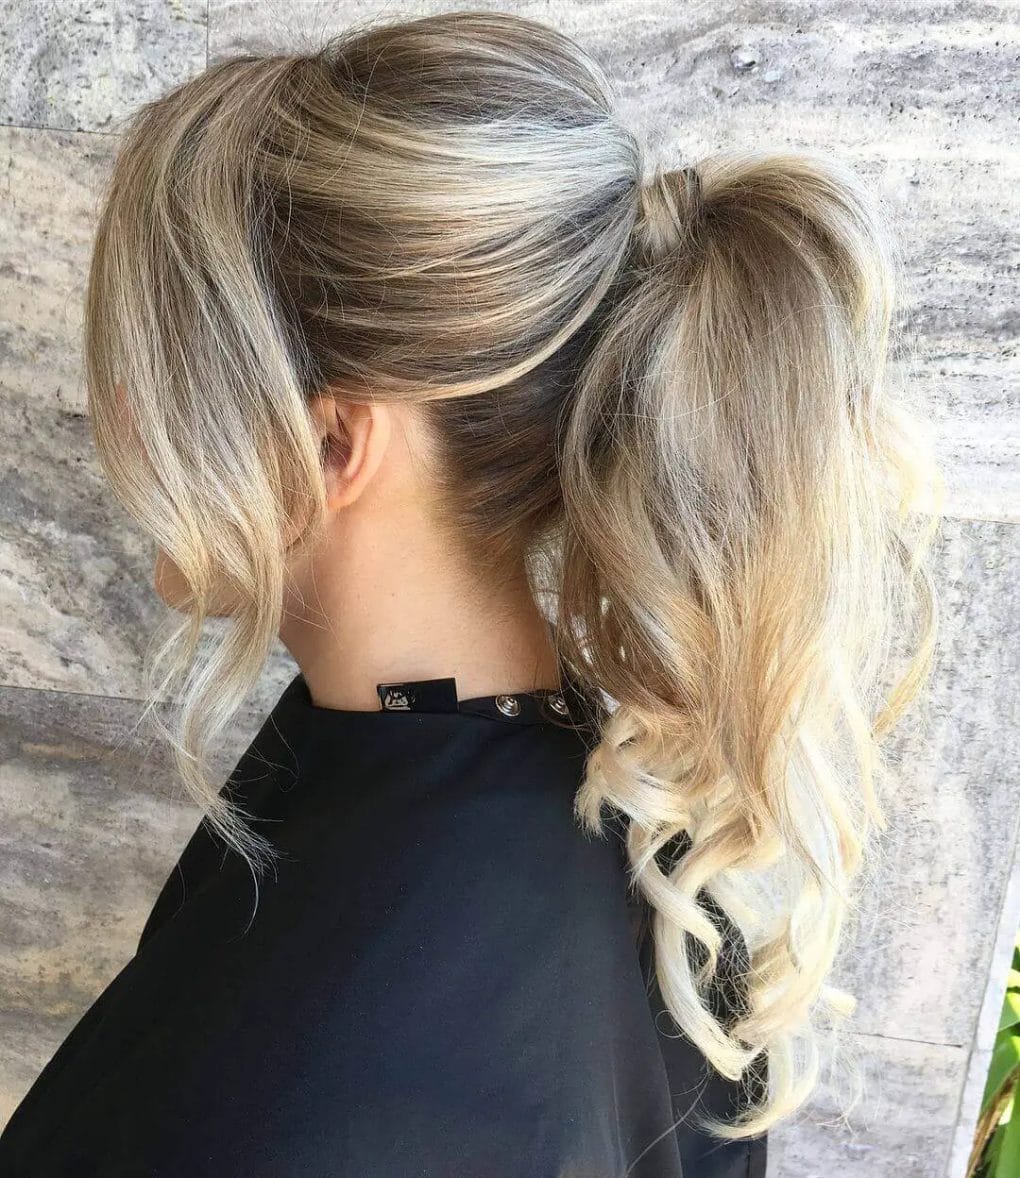 Voluminous curly ash blonde ponytail with darker roots, showcasing romantic curls and expert highlights.